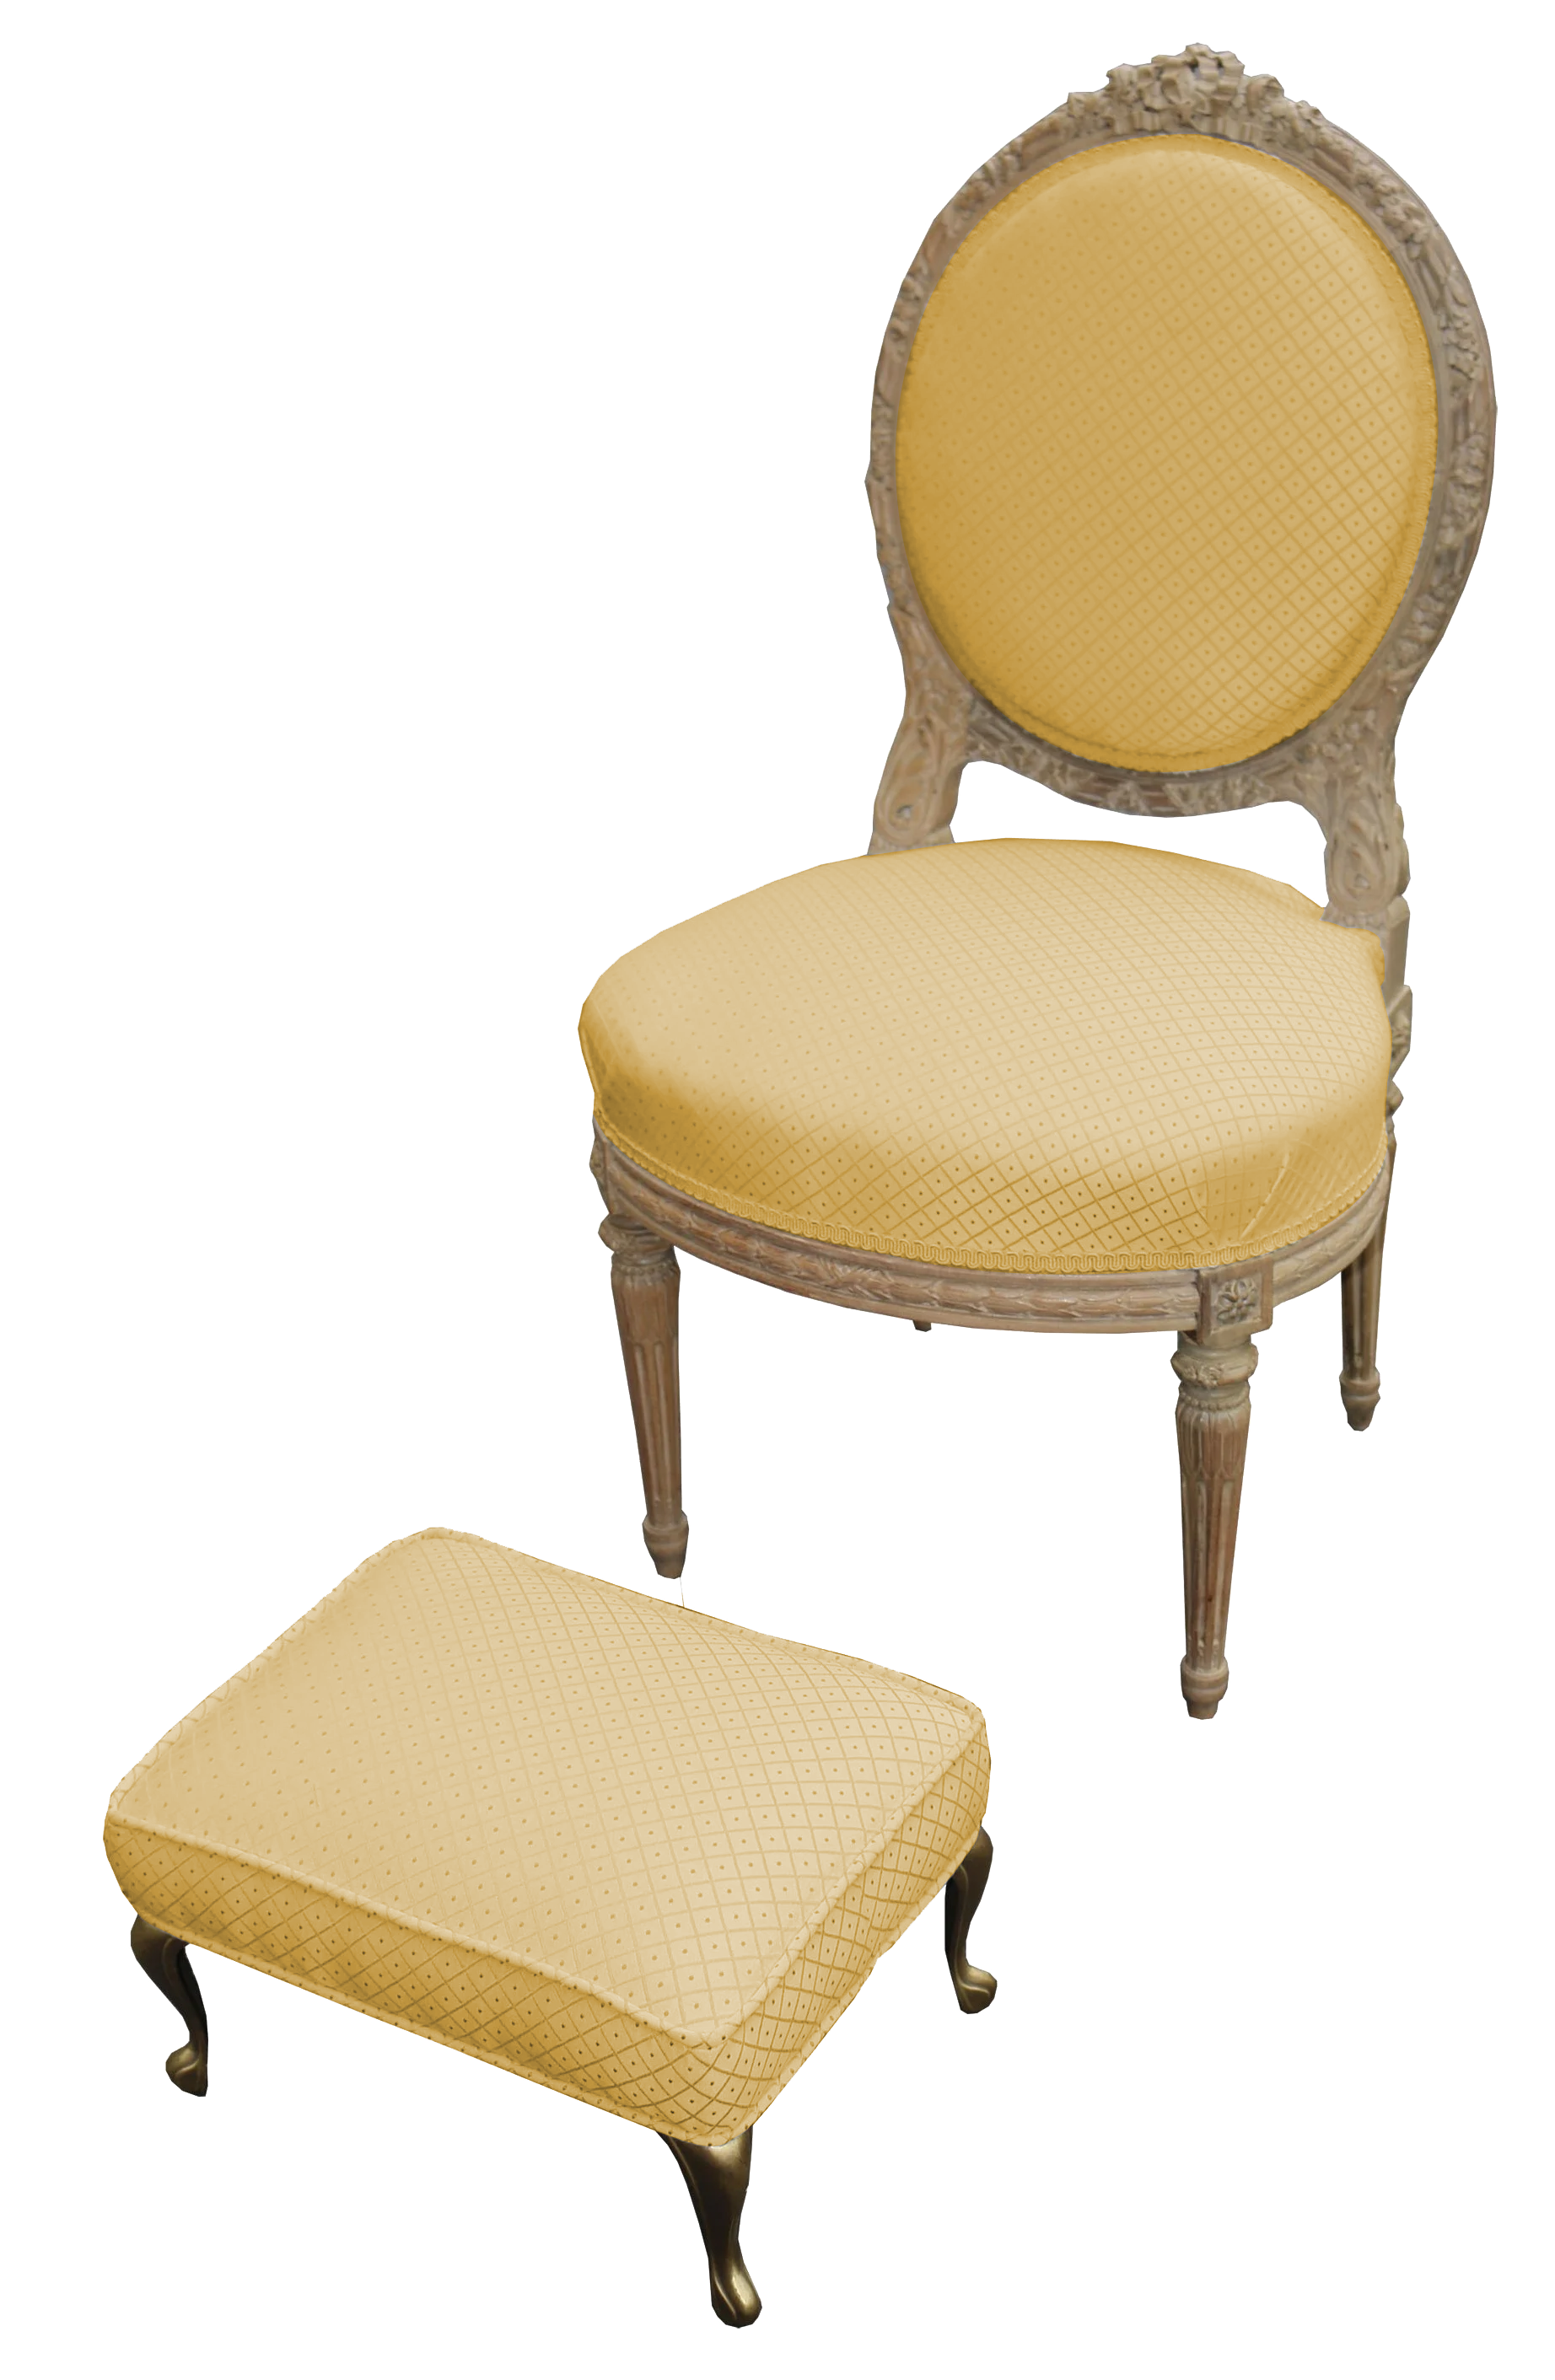 yellow-Victorian-round-chair-with-foot-rest